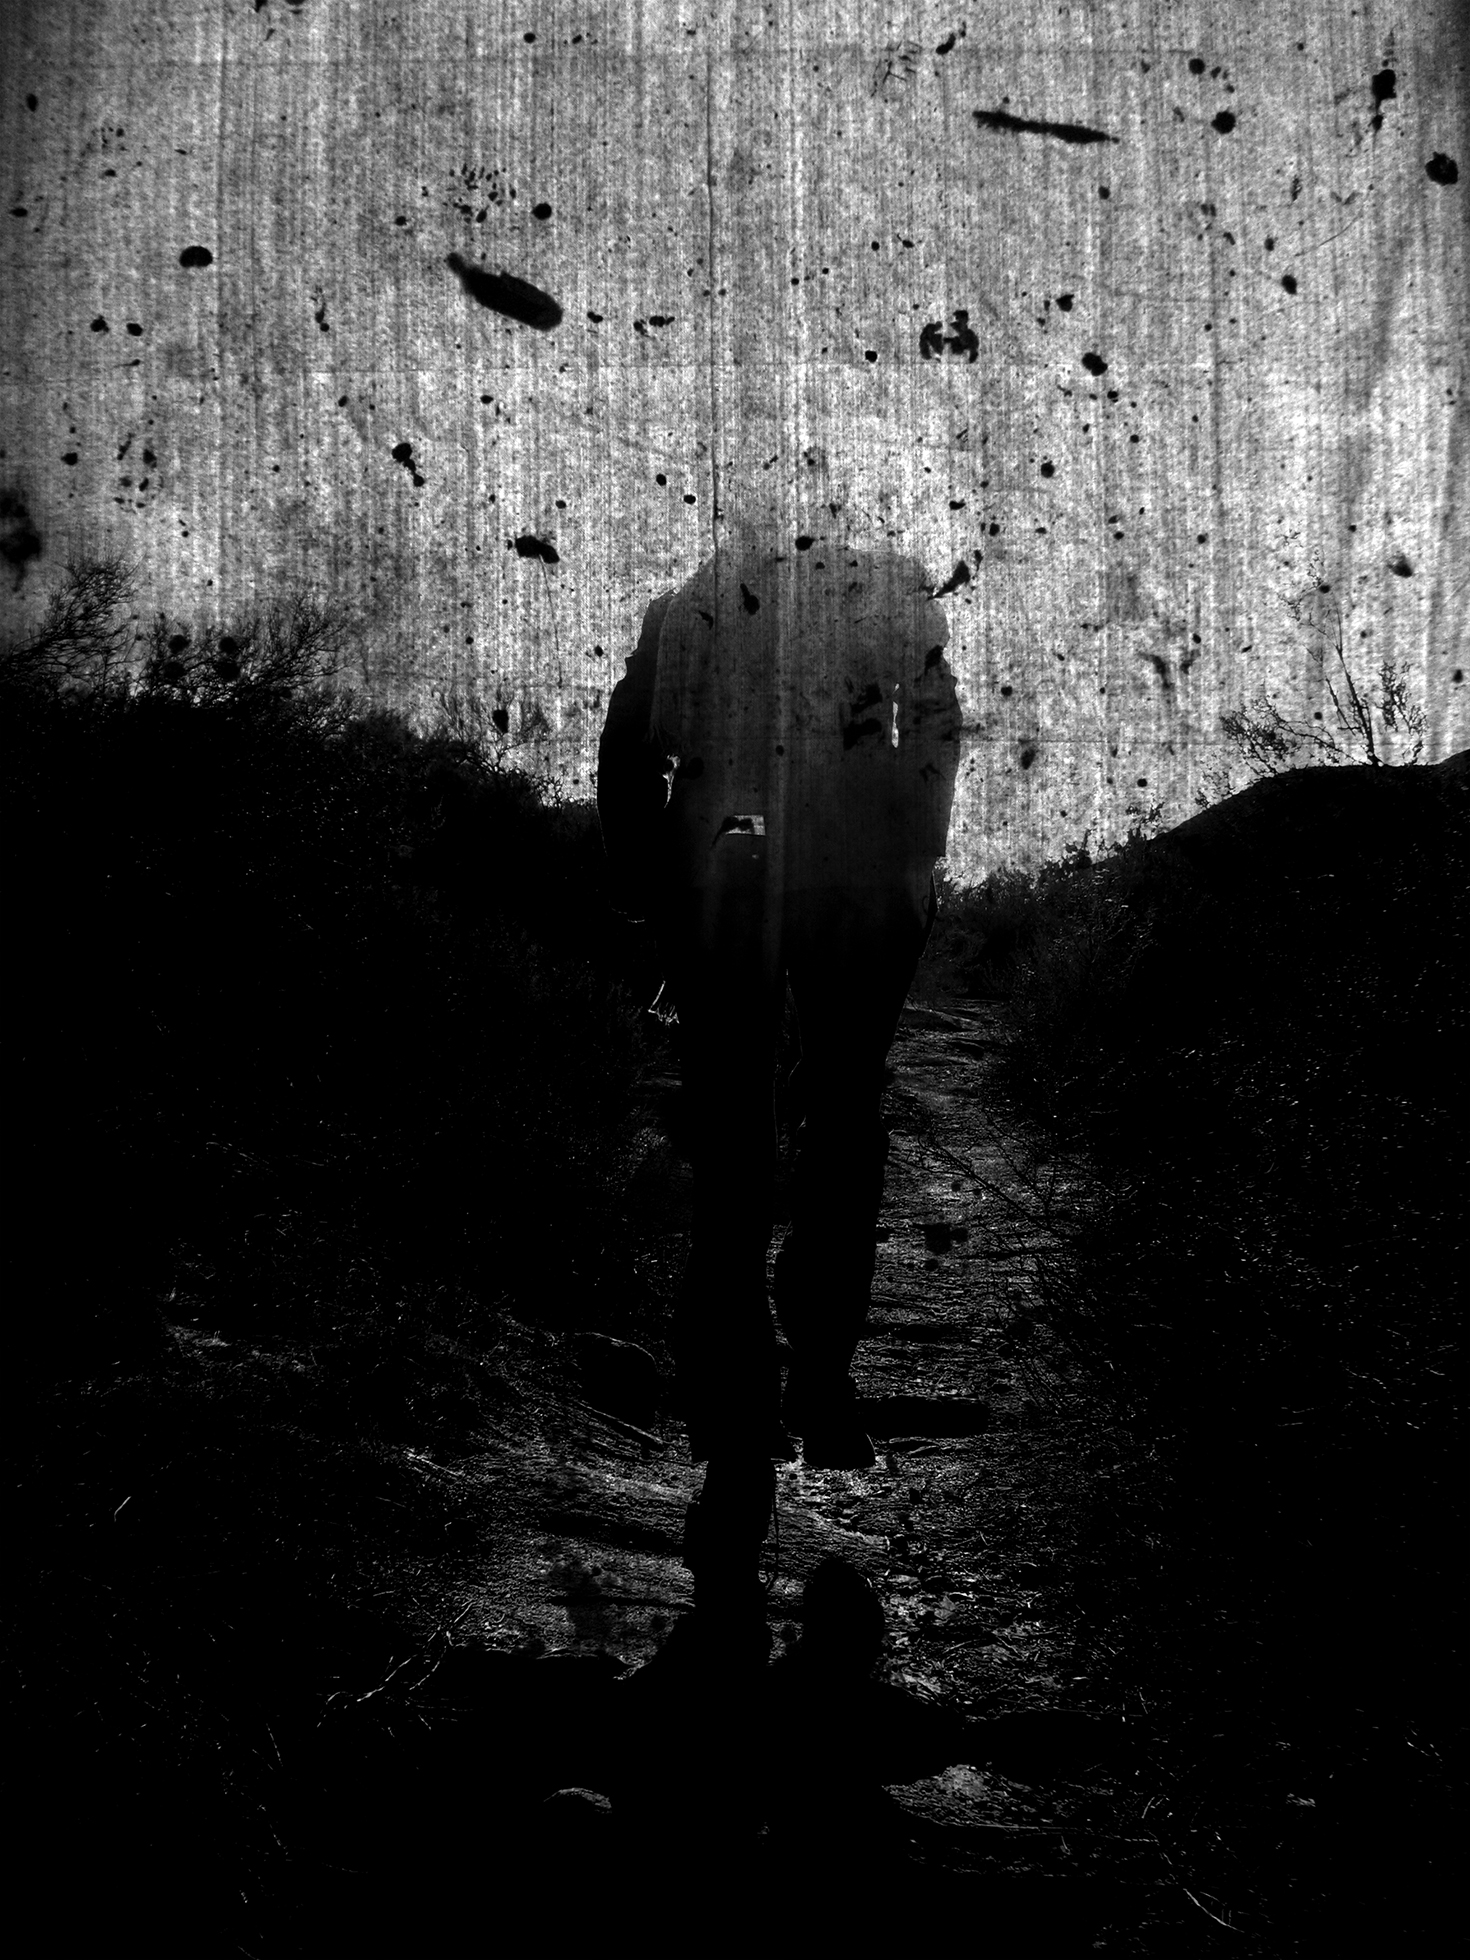 A headless man walks away from the camera on a path toward the horizon. The image is dark, including the sky where dark objects/spots swirl about.